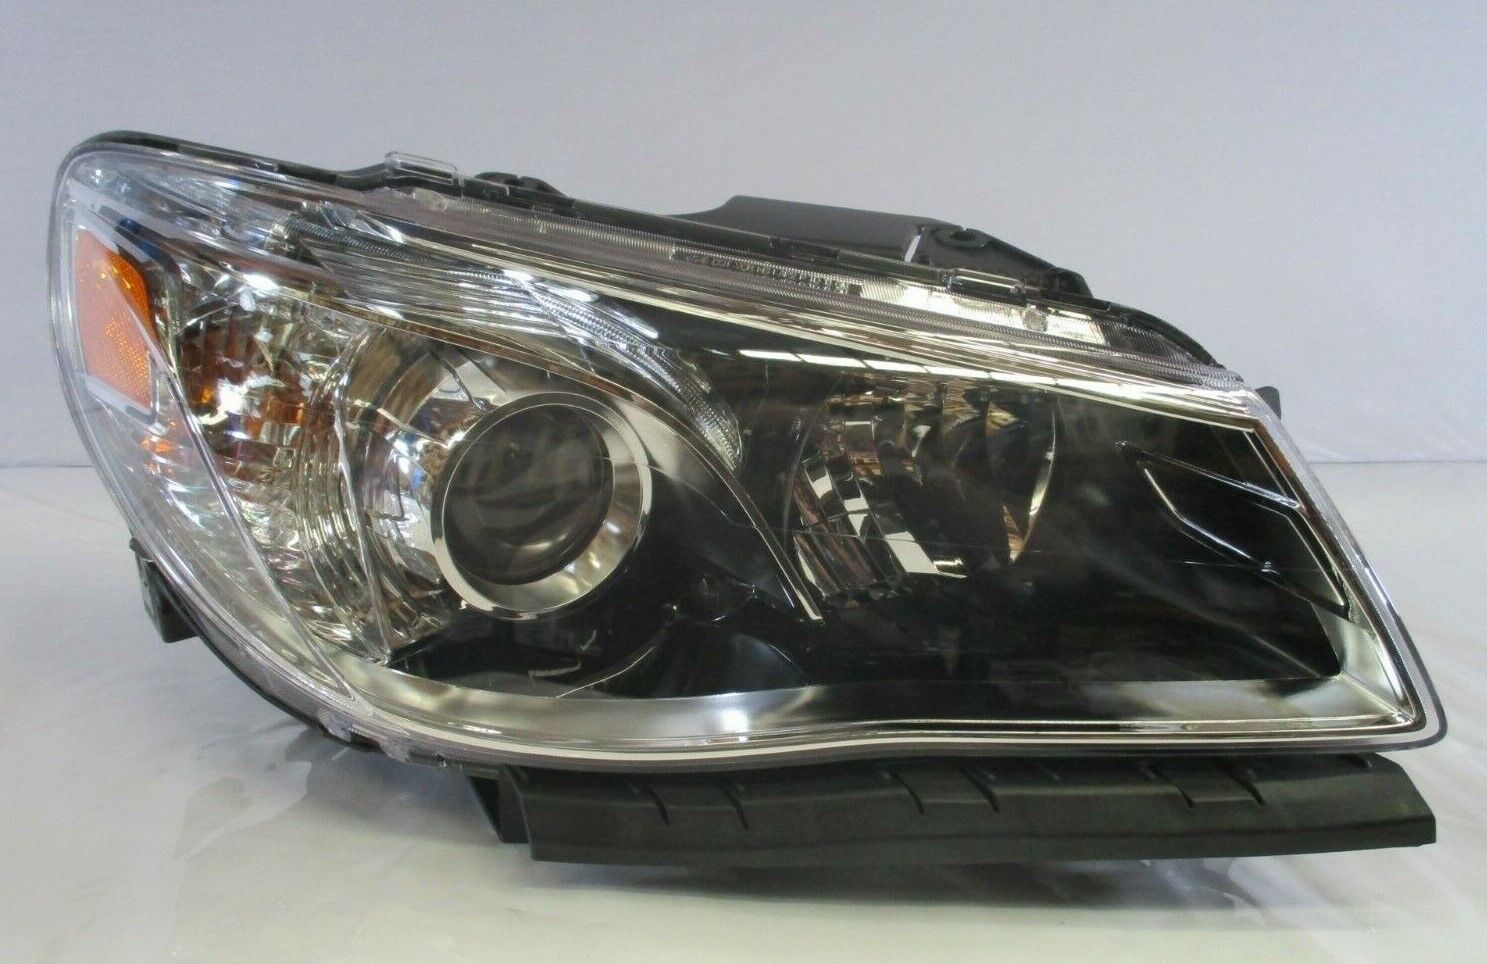 CHEVROLET SS HID HEADLIGHT ASSEMBLY RHS 2014 - 2017 GENUINE # 92275162 92285811